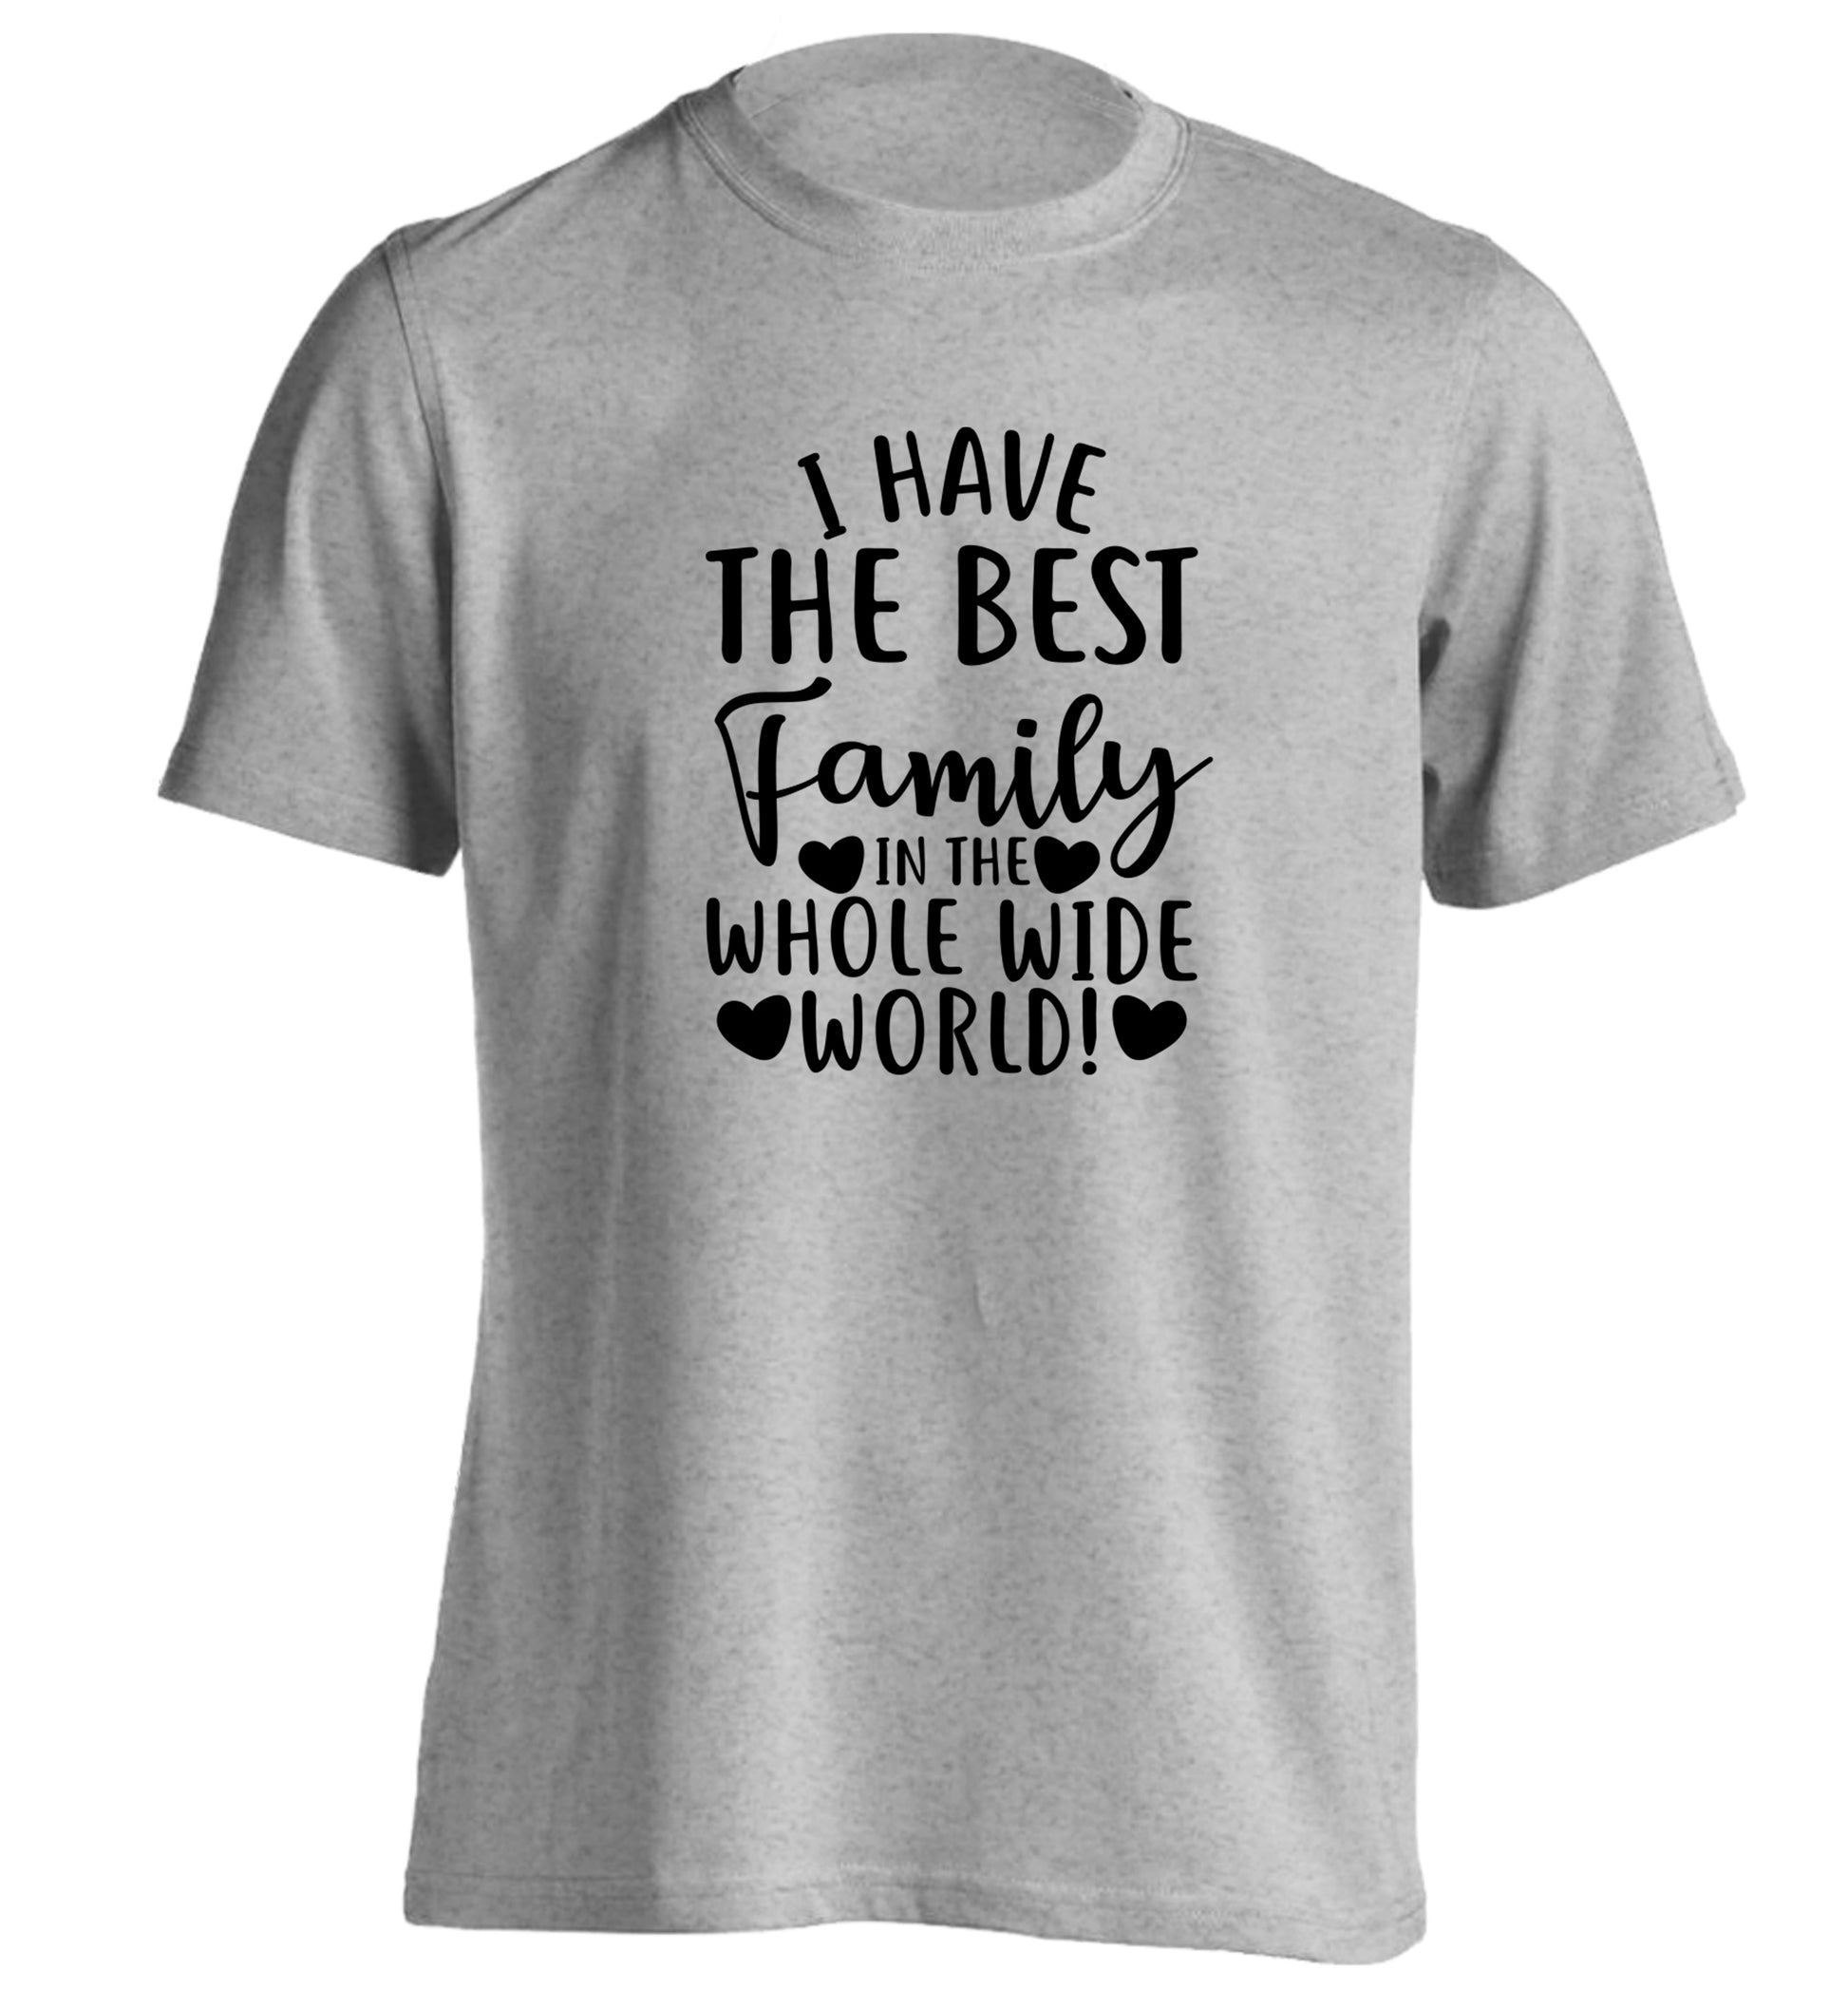 I have the best family in the whole wide world! adults unisex grey Tshirt 2XL